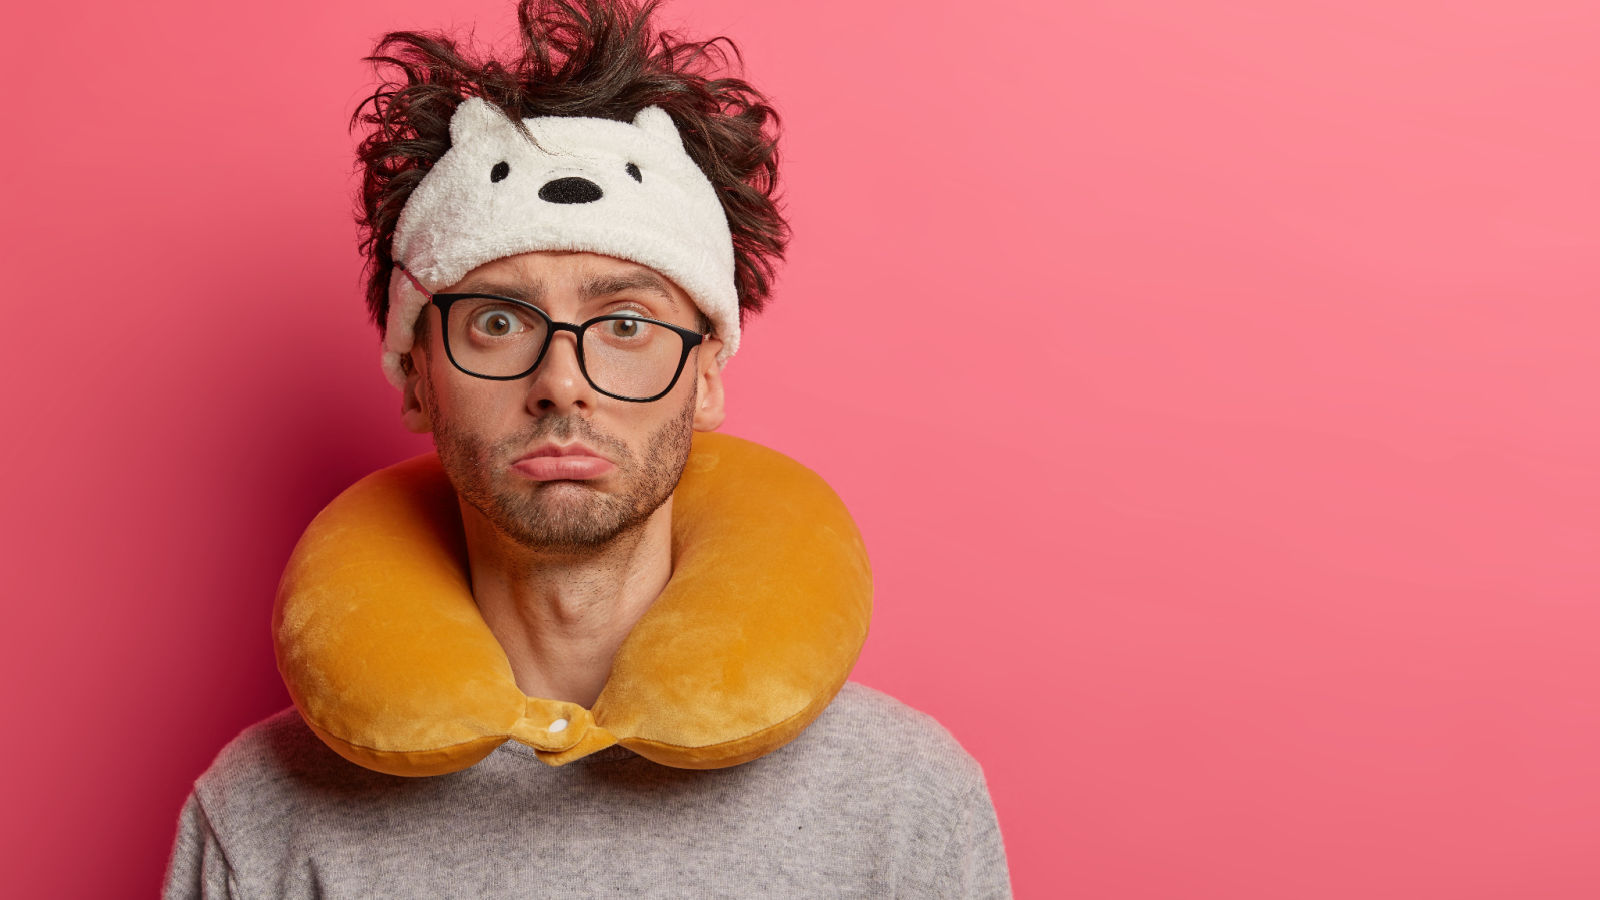 image credit: cast-of-thousands/shutterstock <p>A neck pillow is an absolute must-have for any long-haul journey. It provides essential support, preventing your neck from cranking into uncomfortable positions while you sleep. Many seasoned travelers swear by memory foam versions for that extra level of comfort. “Never fly without it—it’s a game-changer,” says JetSetLife87 on a travel forum.</p>